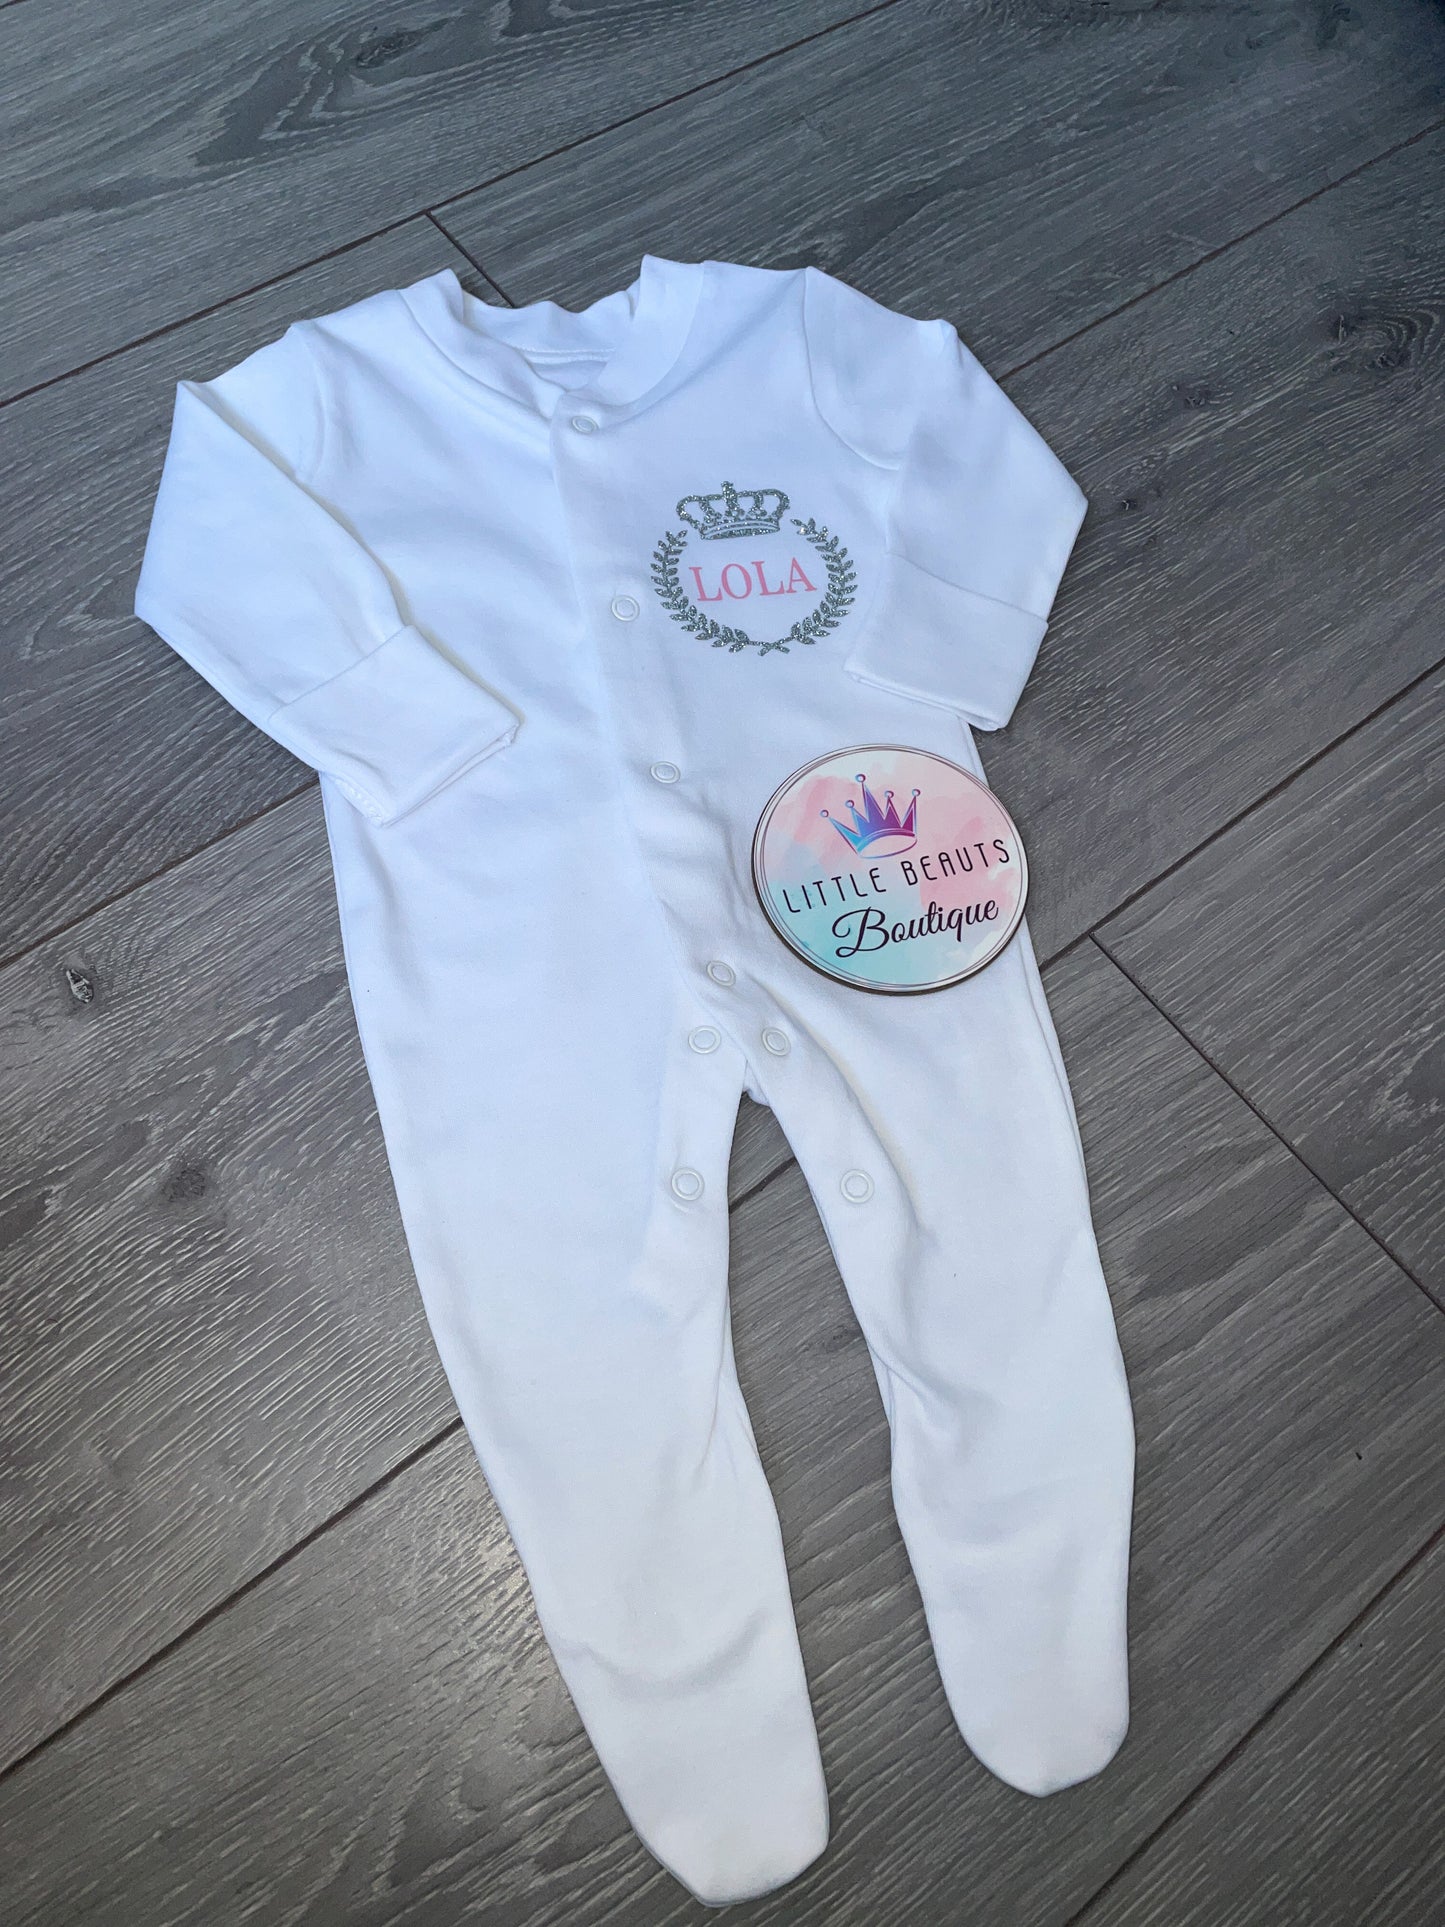 Personalised Crown & Crest Name / Initials Babygrow Sleepsuit Romper 2 for £12